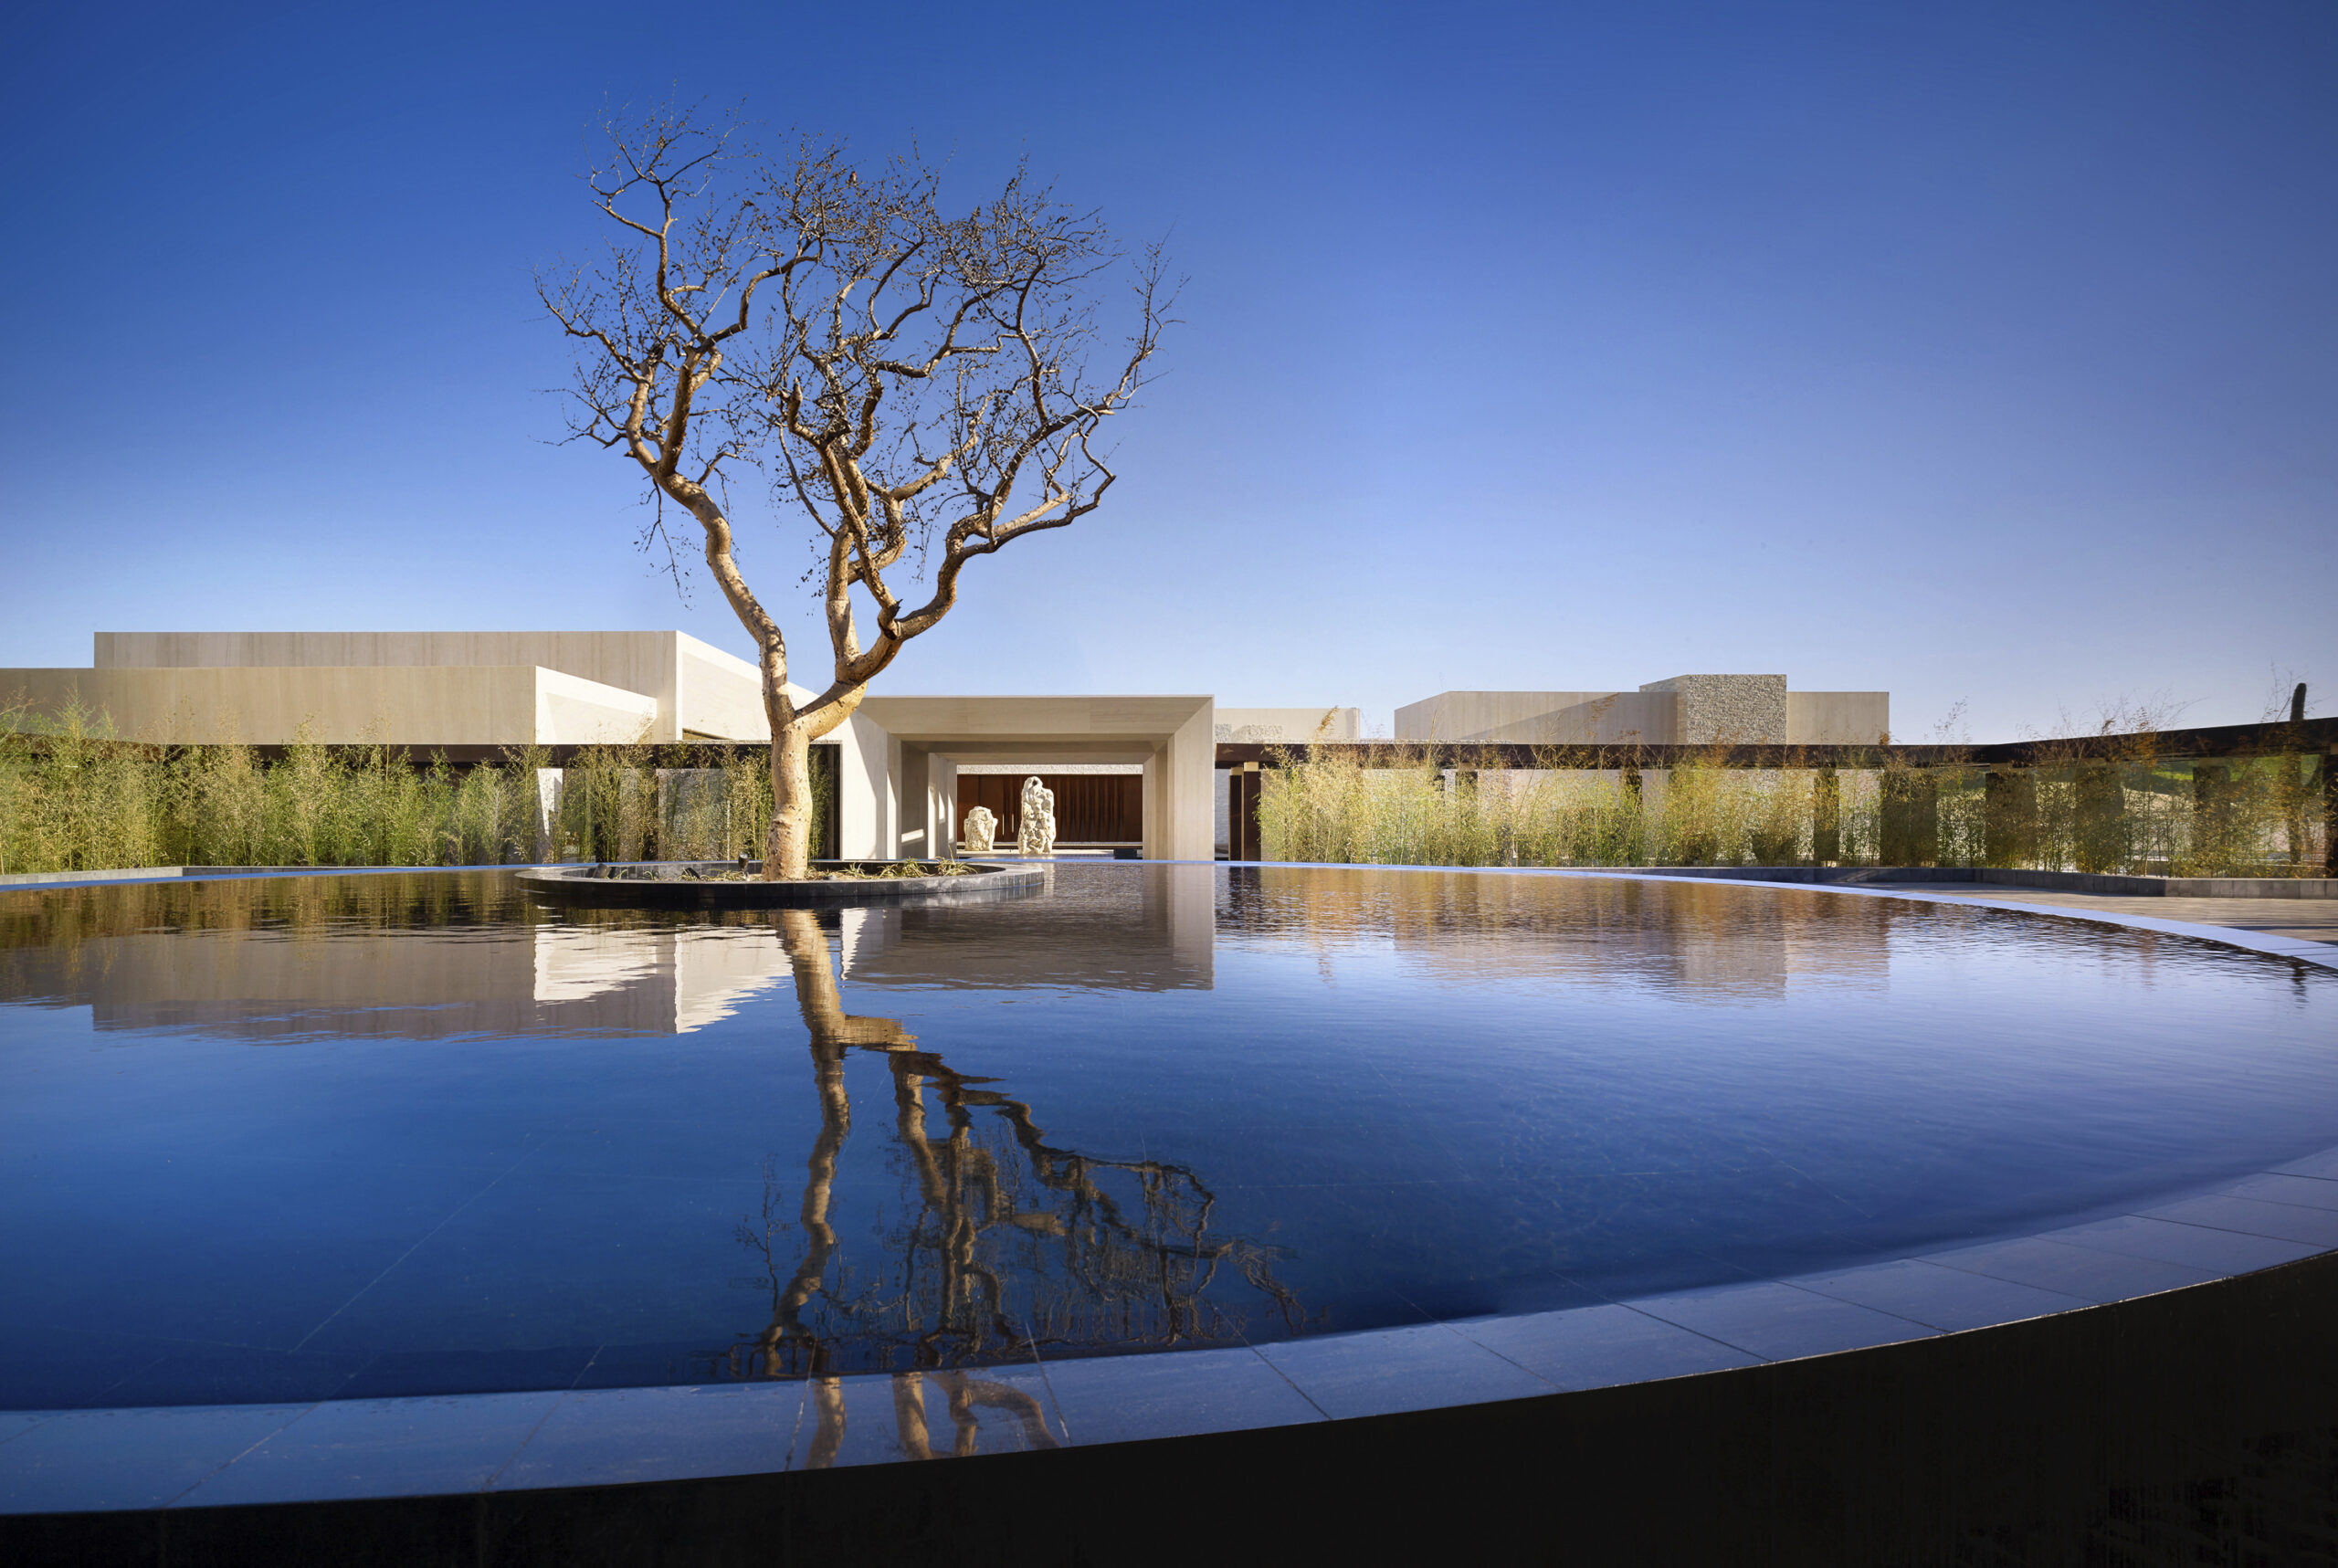 Nobu hotel los cabos architecture and landscape looking over the water feature with a tree towards the main lobby and reception area